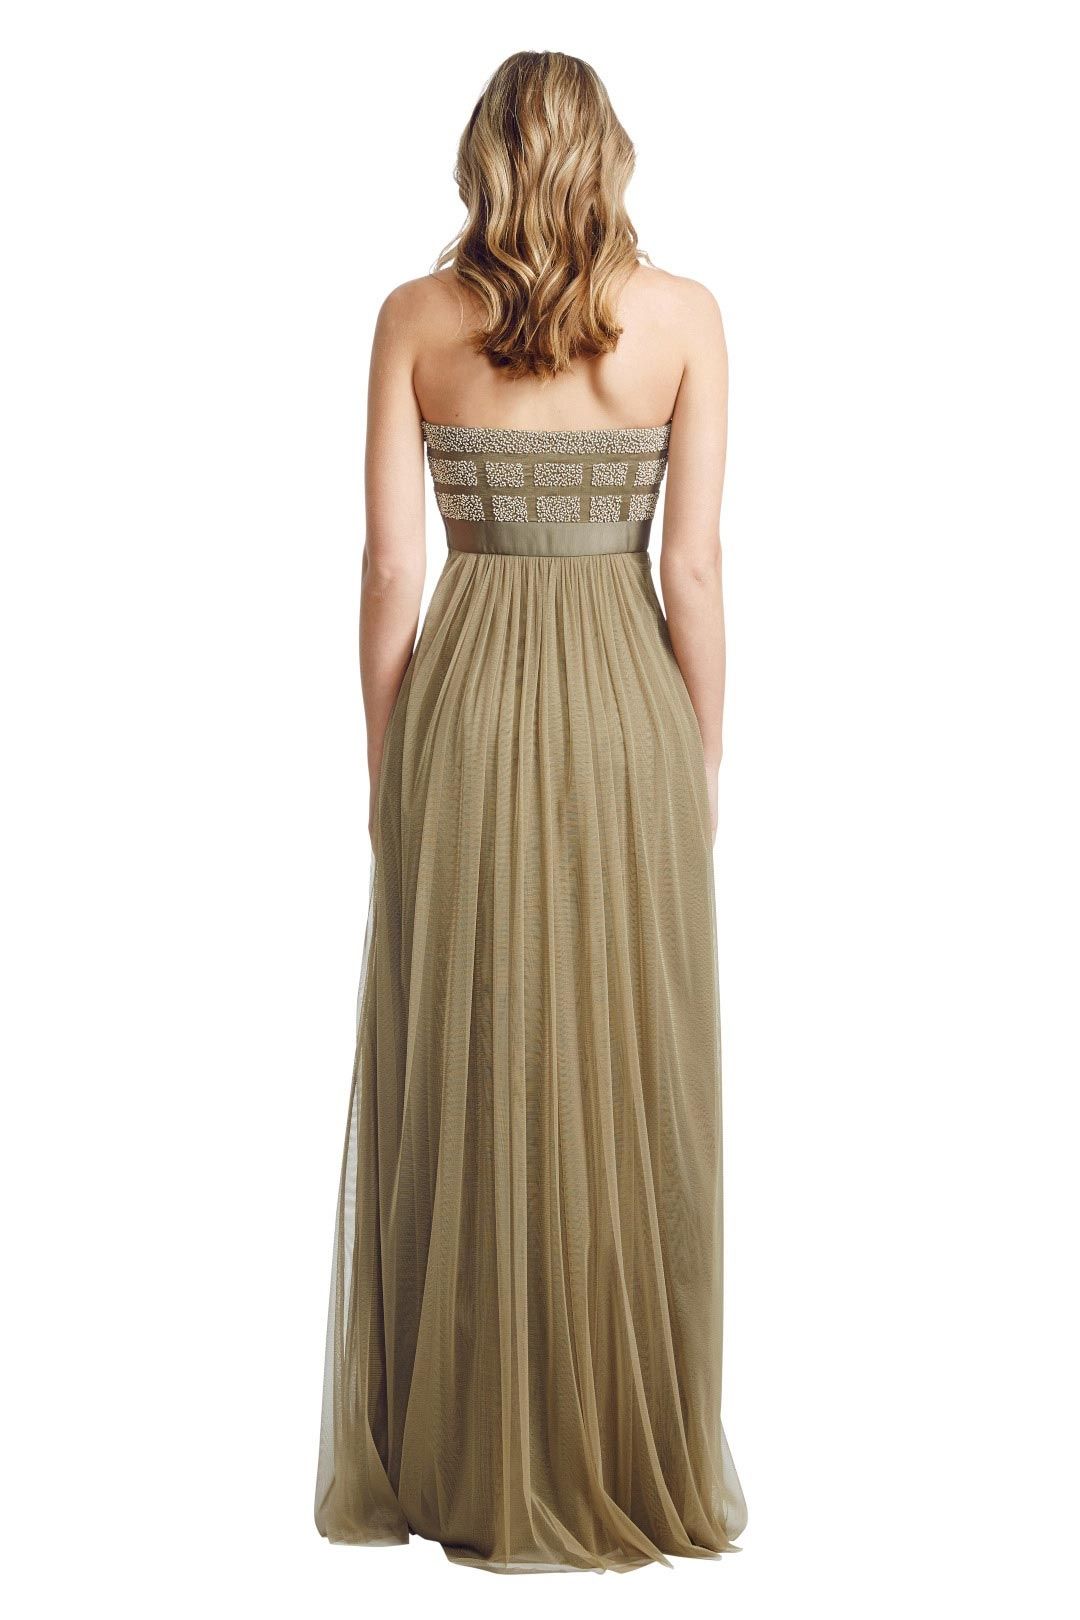 George - Pixel Gown - Olive - Back